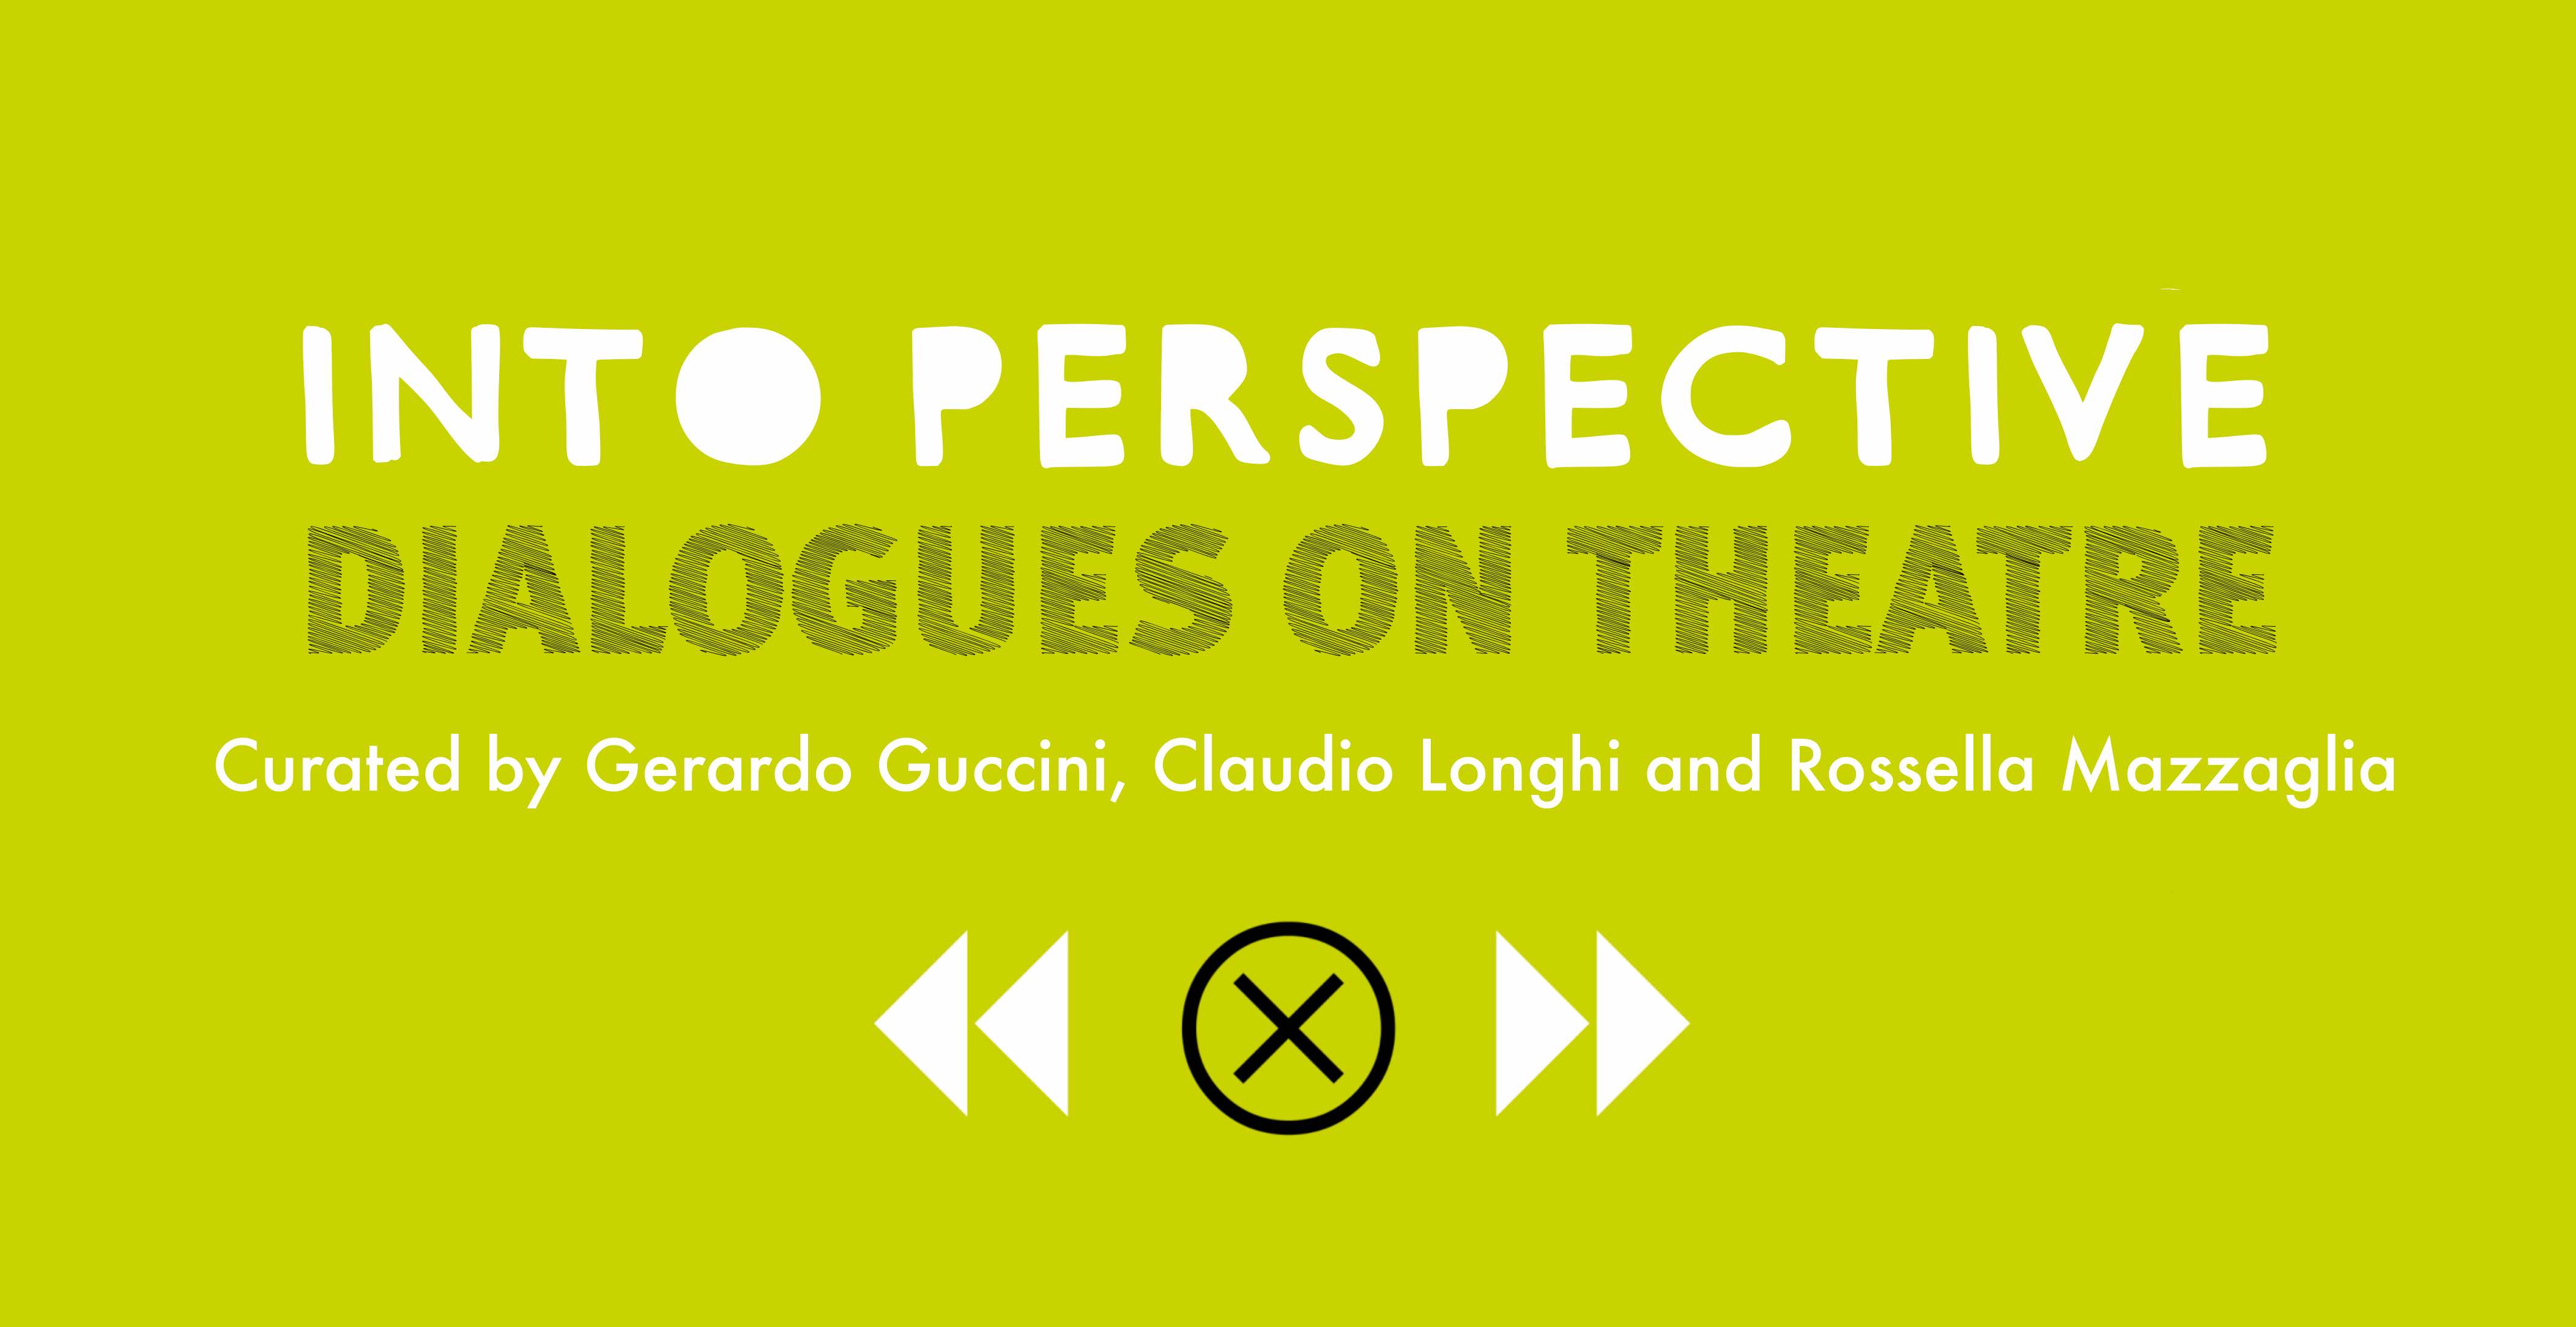 Into Perspective. Dialogues on Theatre